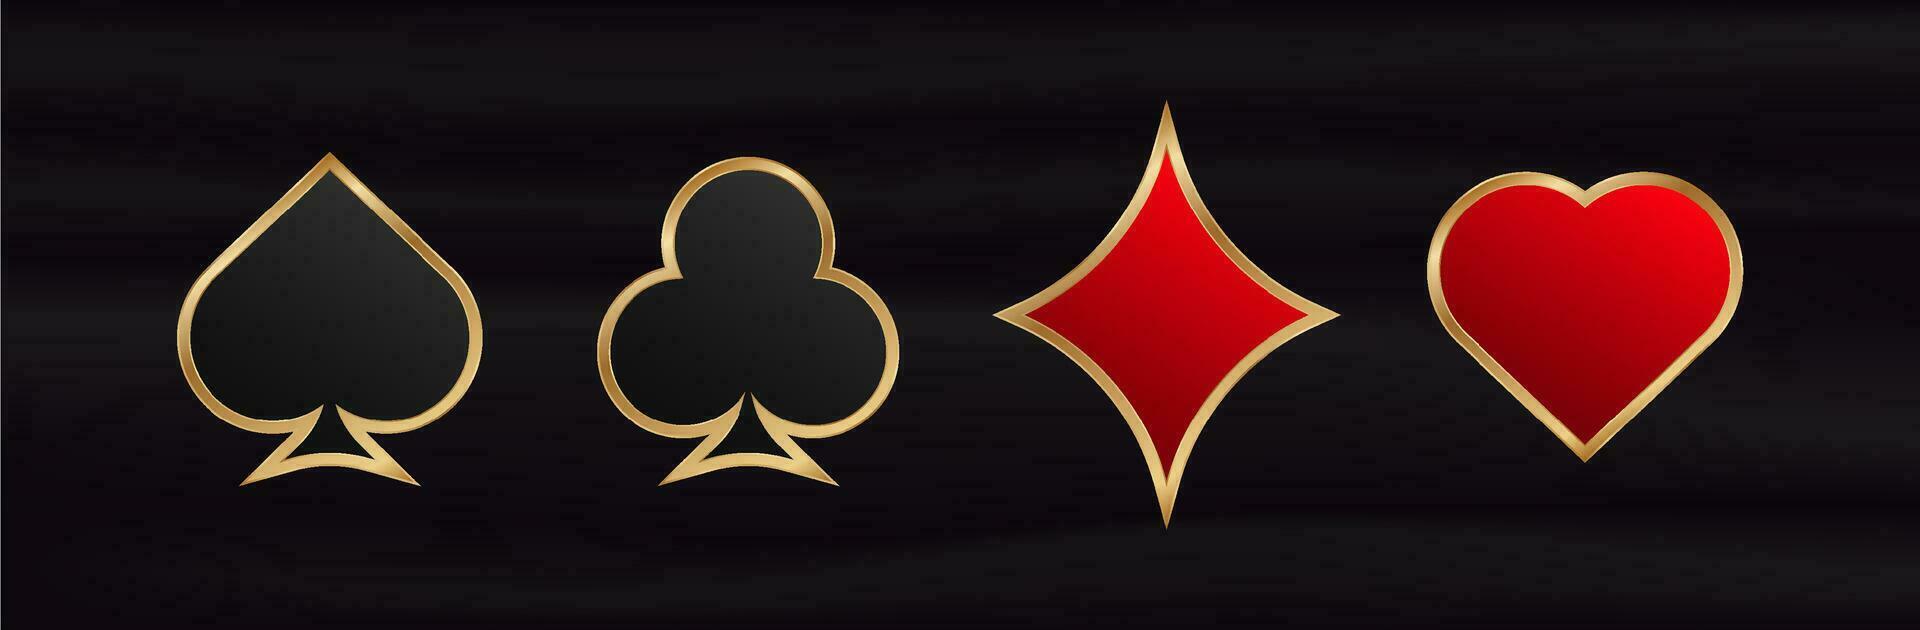 Gambling card suits. Game red symbol of luck in poker and black successful game in casino with blackjack and vector bets